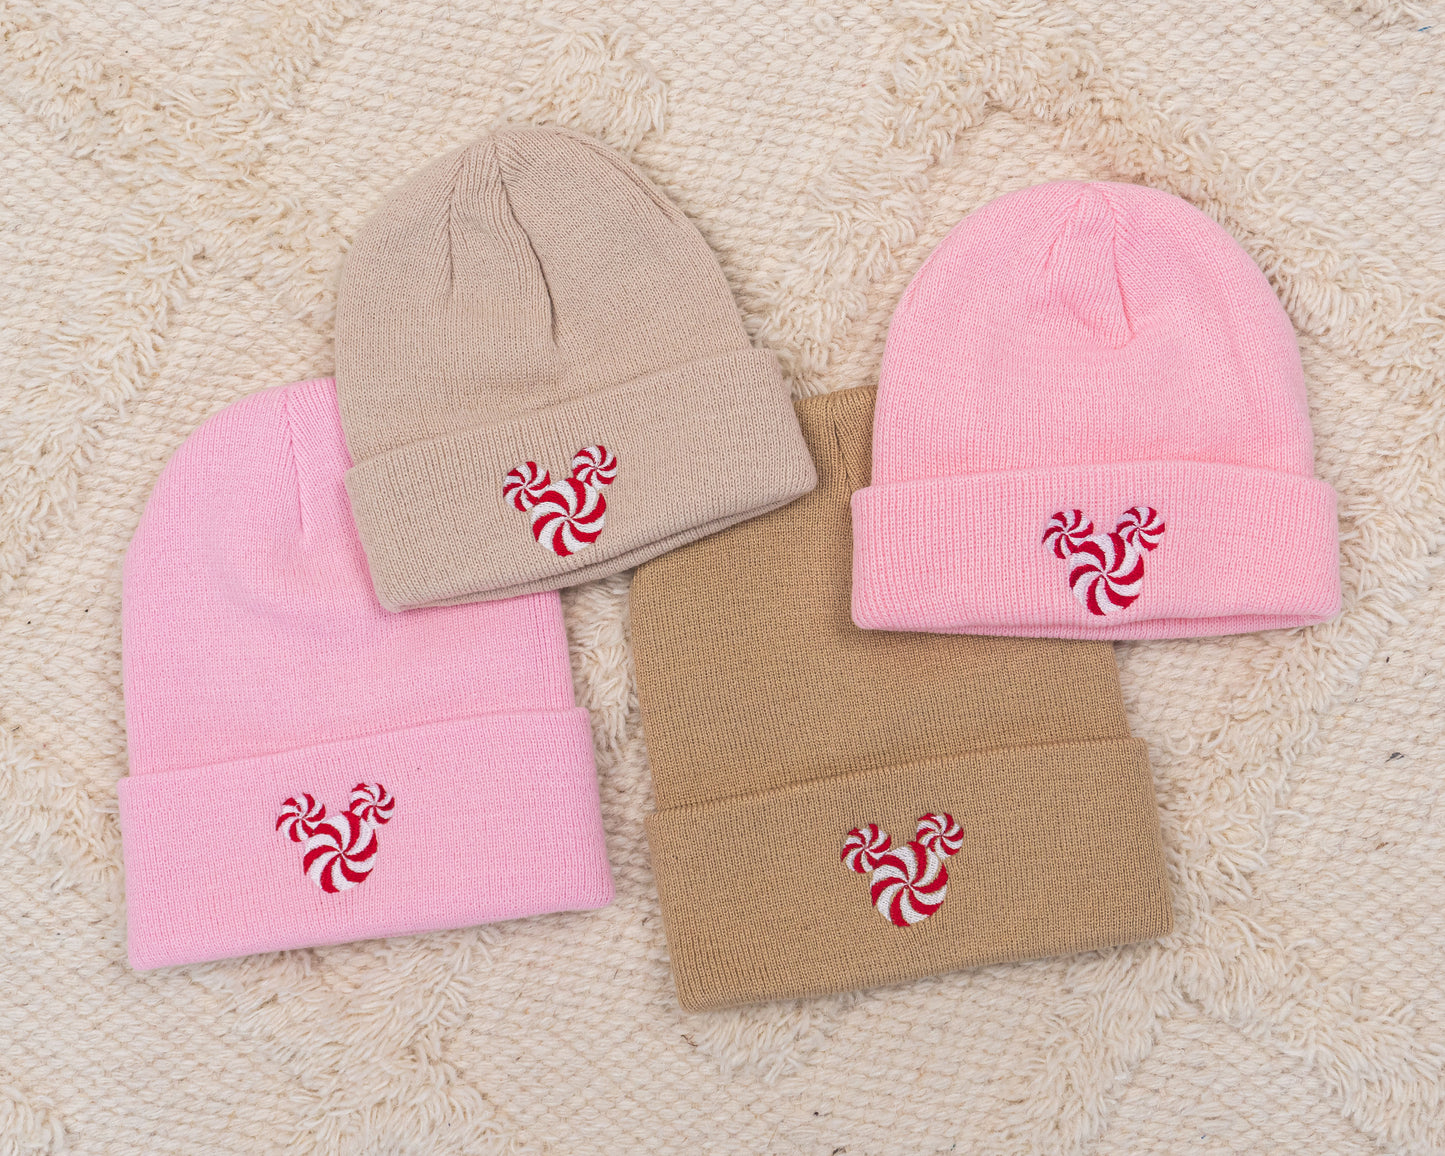 Peppermint Mouse - Embroidered Beanie (Tan)